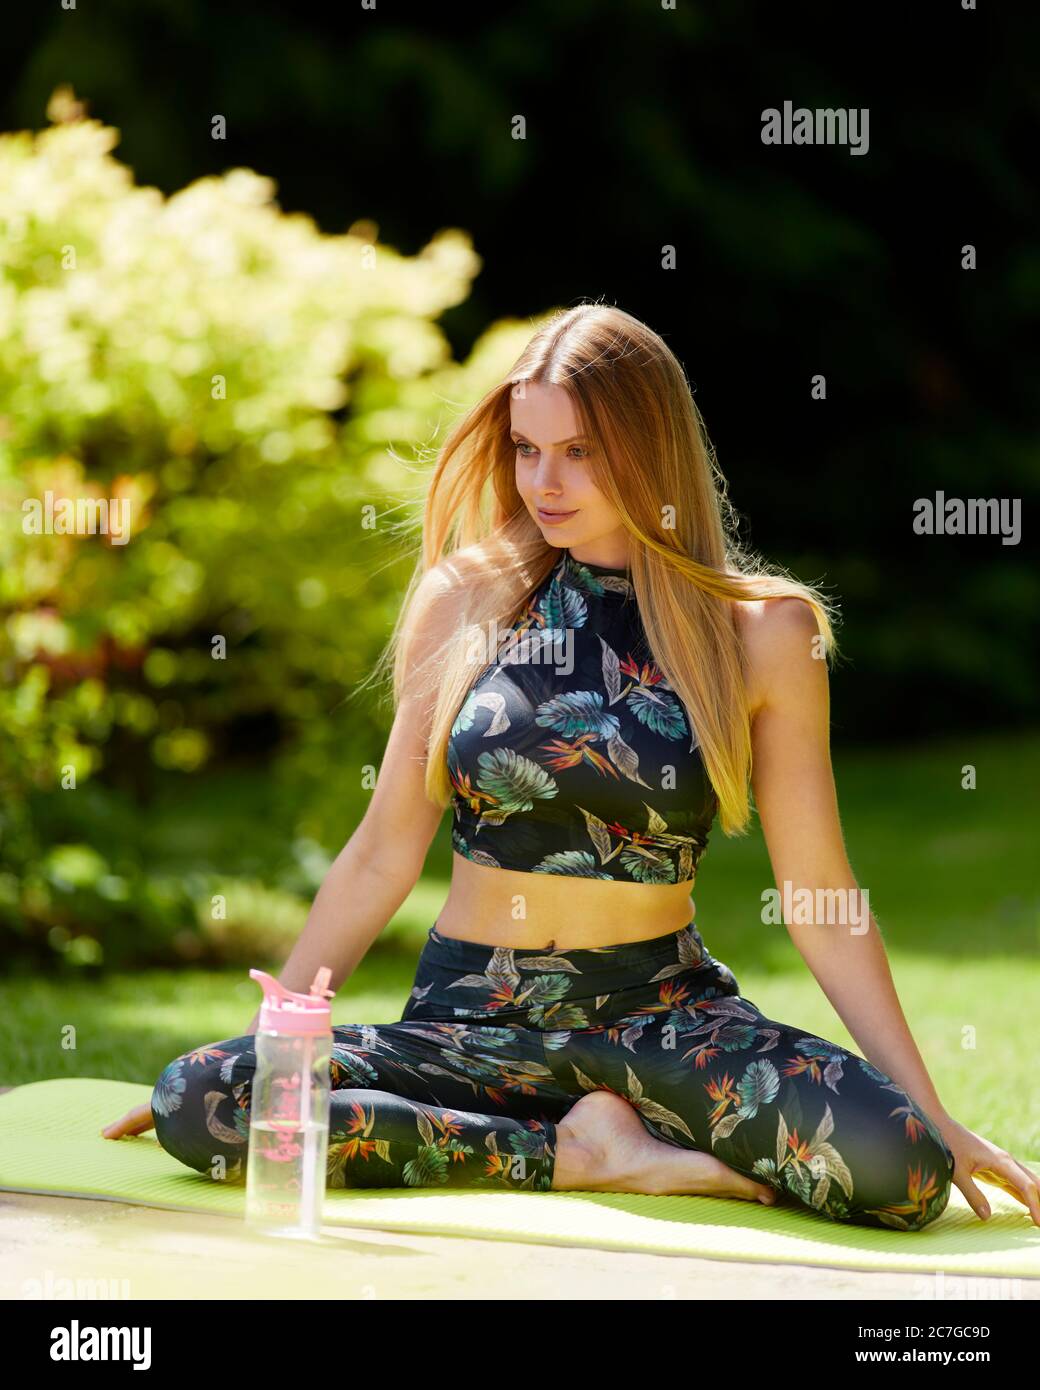 Girl practicing Yoga outdoors Banque D'Images